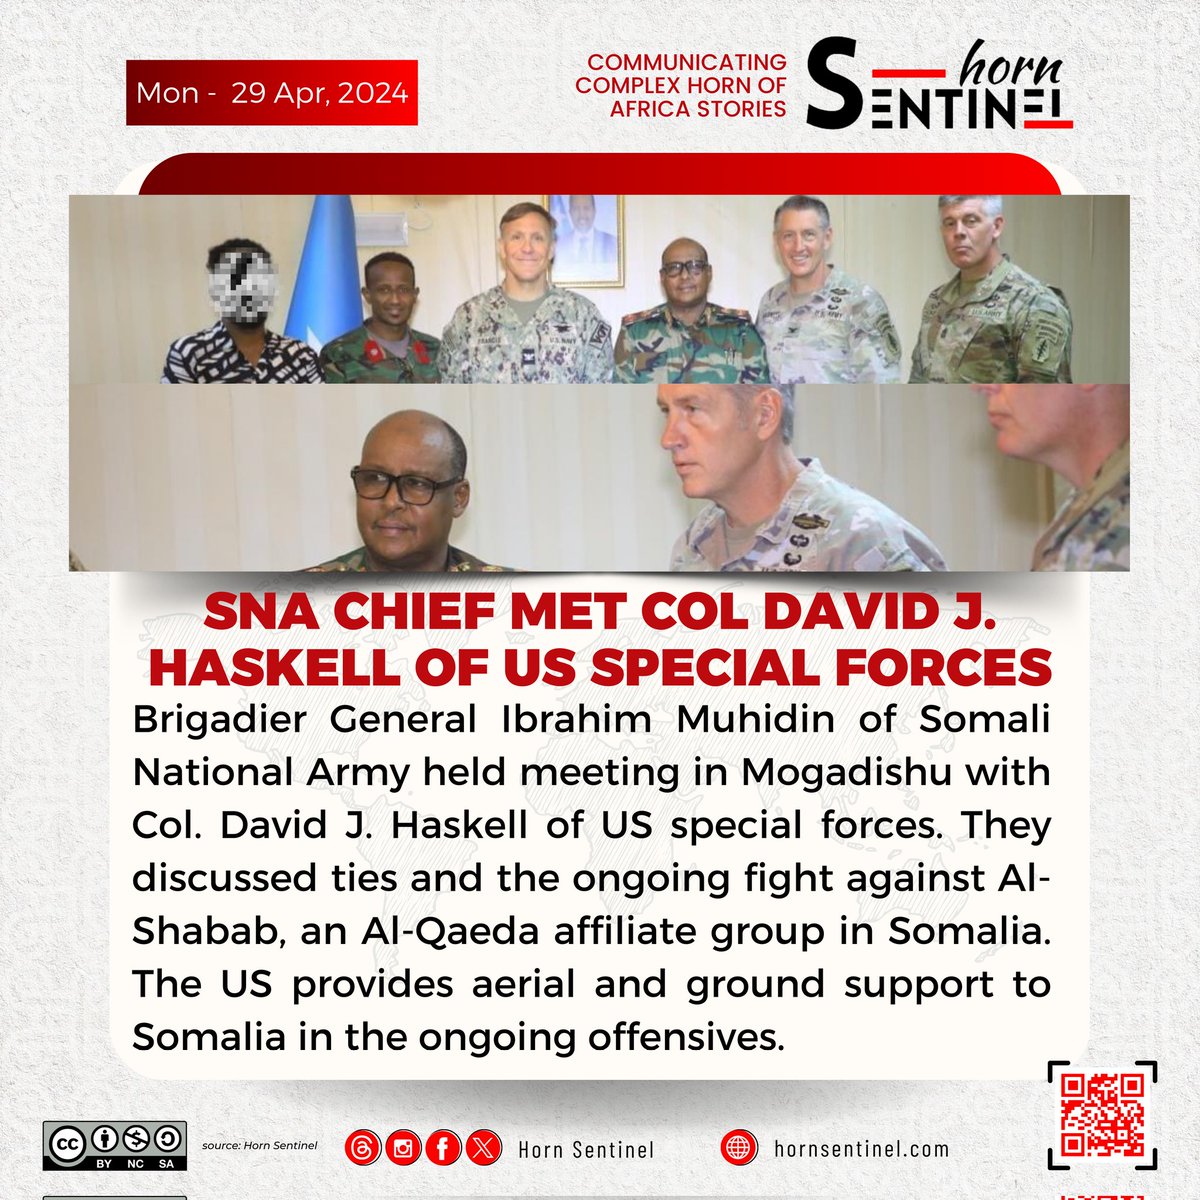 BG Ibrahim Muhidin of @SNAForce held meeting with Col. David J. Haskell, Dep Commander of #US special forces. They discussed the ongoing fight against #AlShabab, an #AlQaeda affiliates in #Somalia. The @US2SOMALIA provides aerial & ground support to SNA in the ongoing offensives.